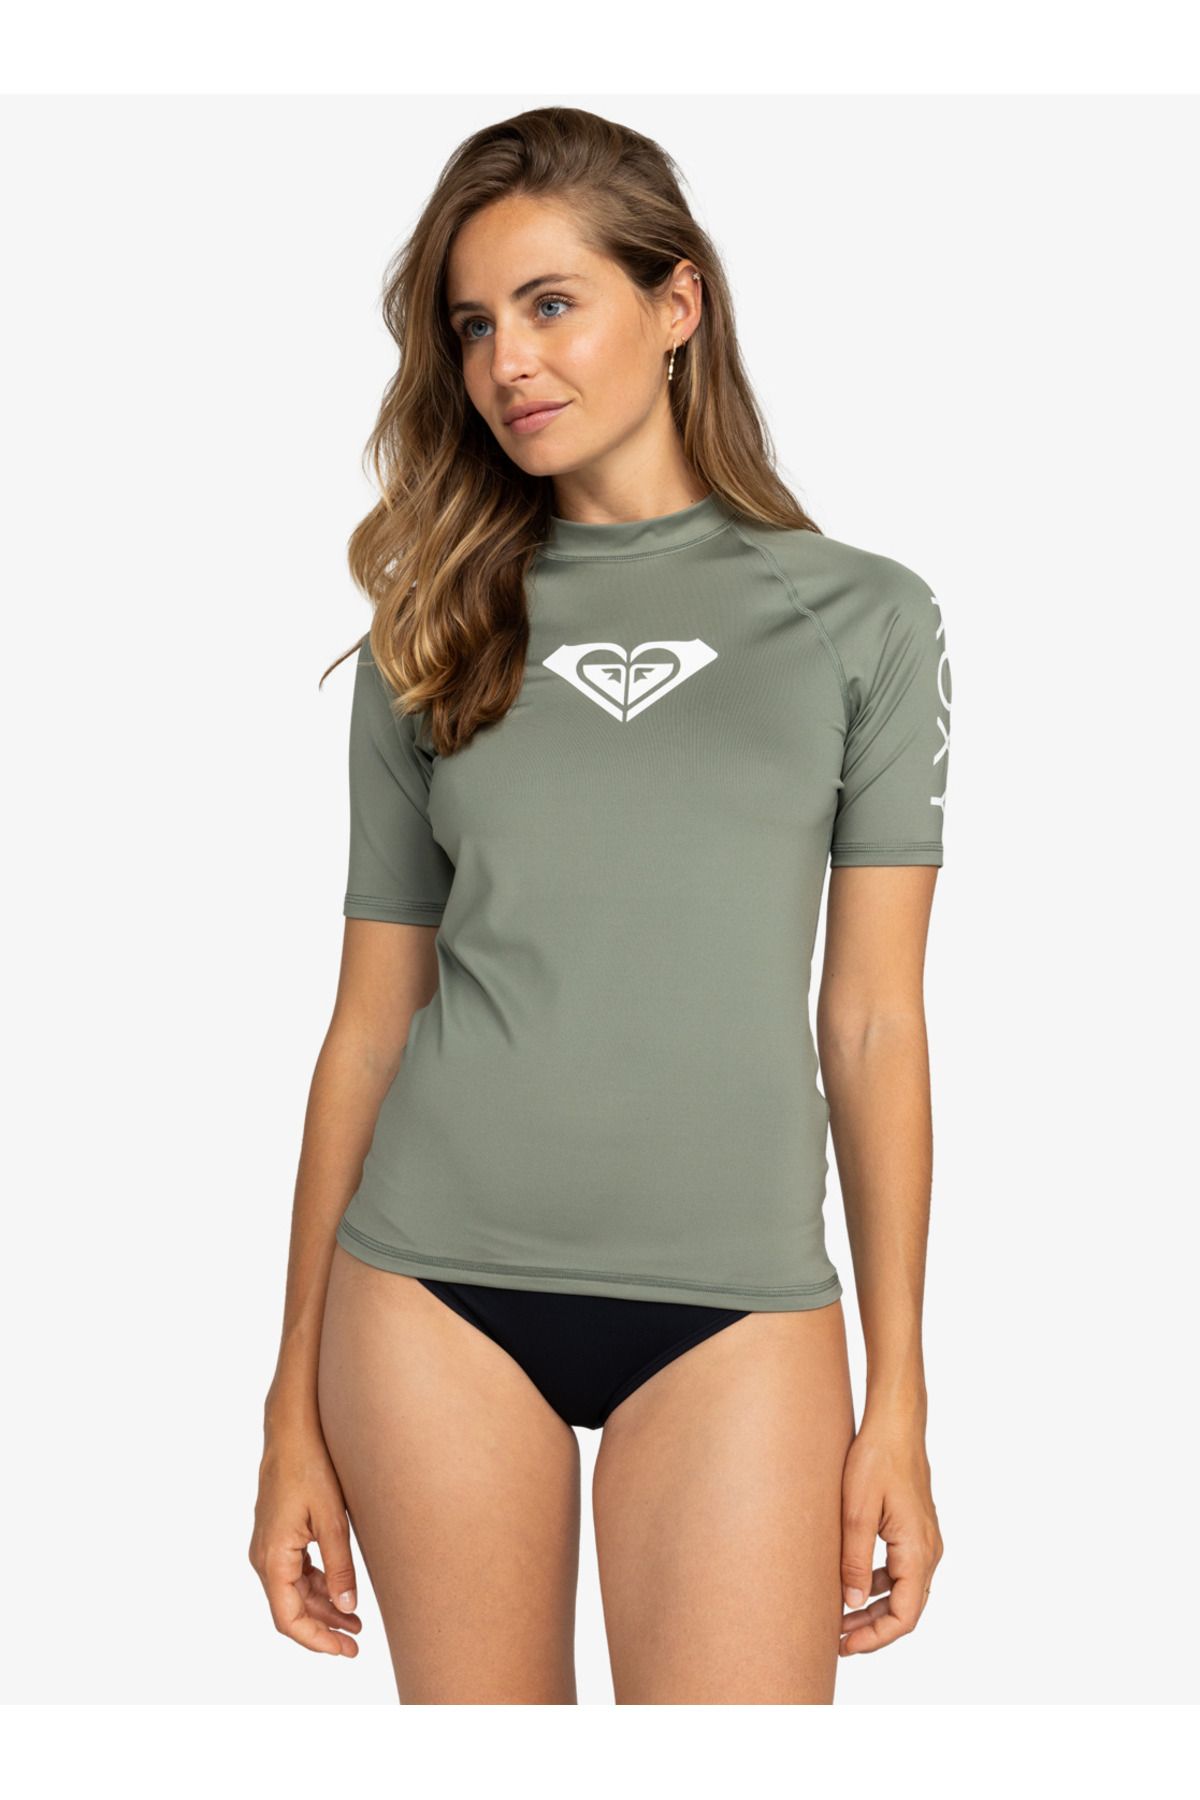 Quiksilver WHOLE HEARTED RUSH GUARD